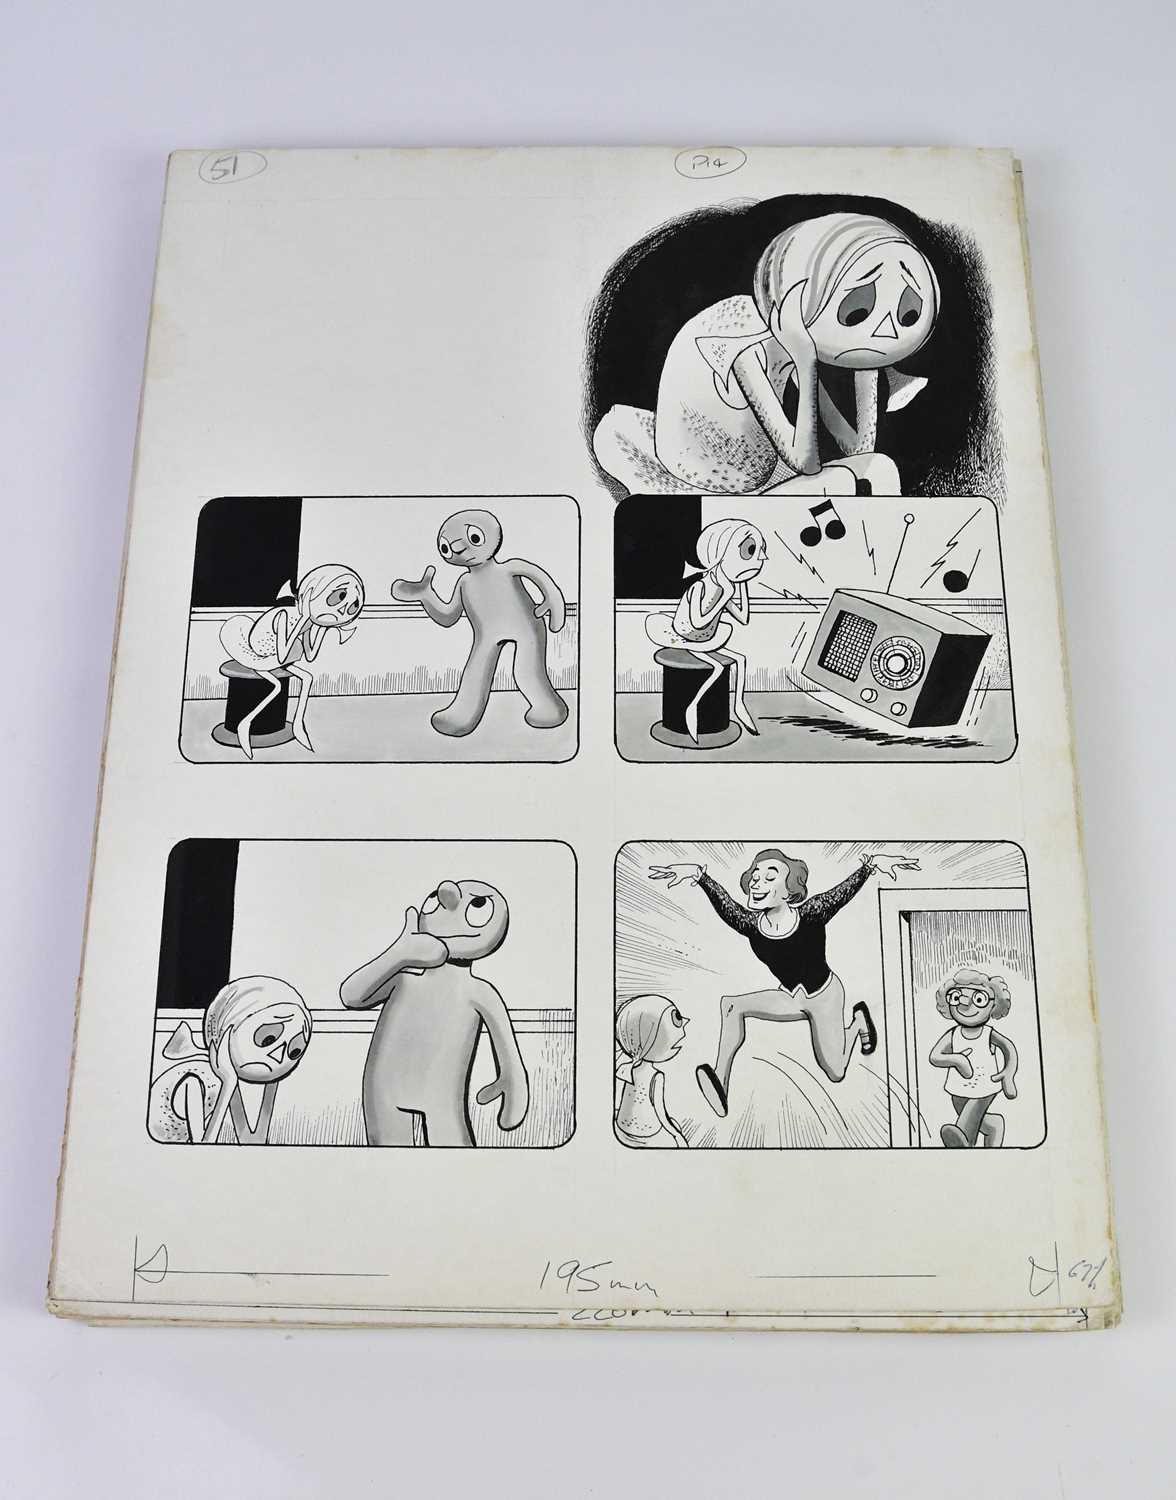 † BILL MEVIN; ten original black and white storyboard cartoons for Morph, produced for holiday - Image 2 of 2